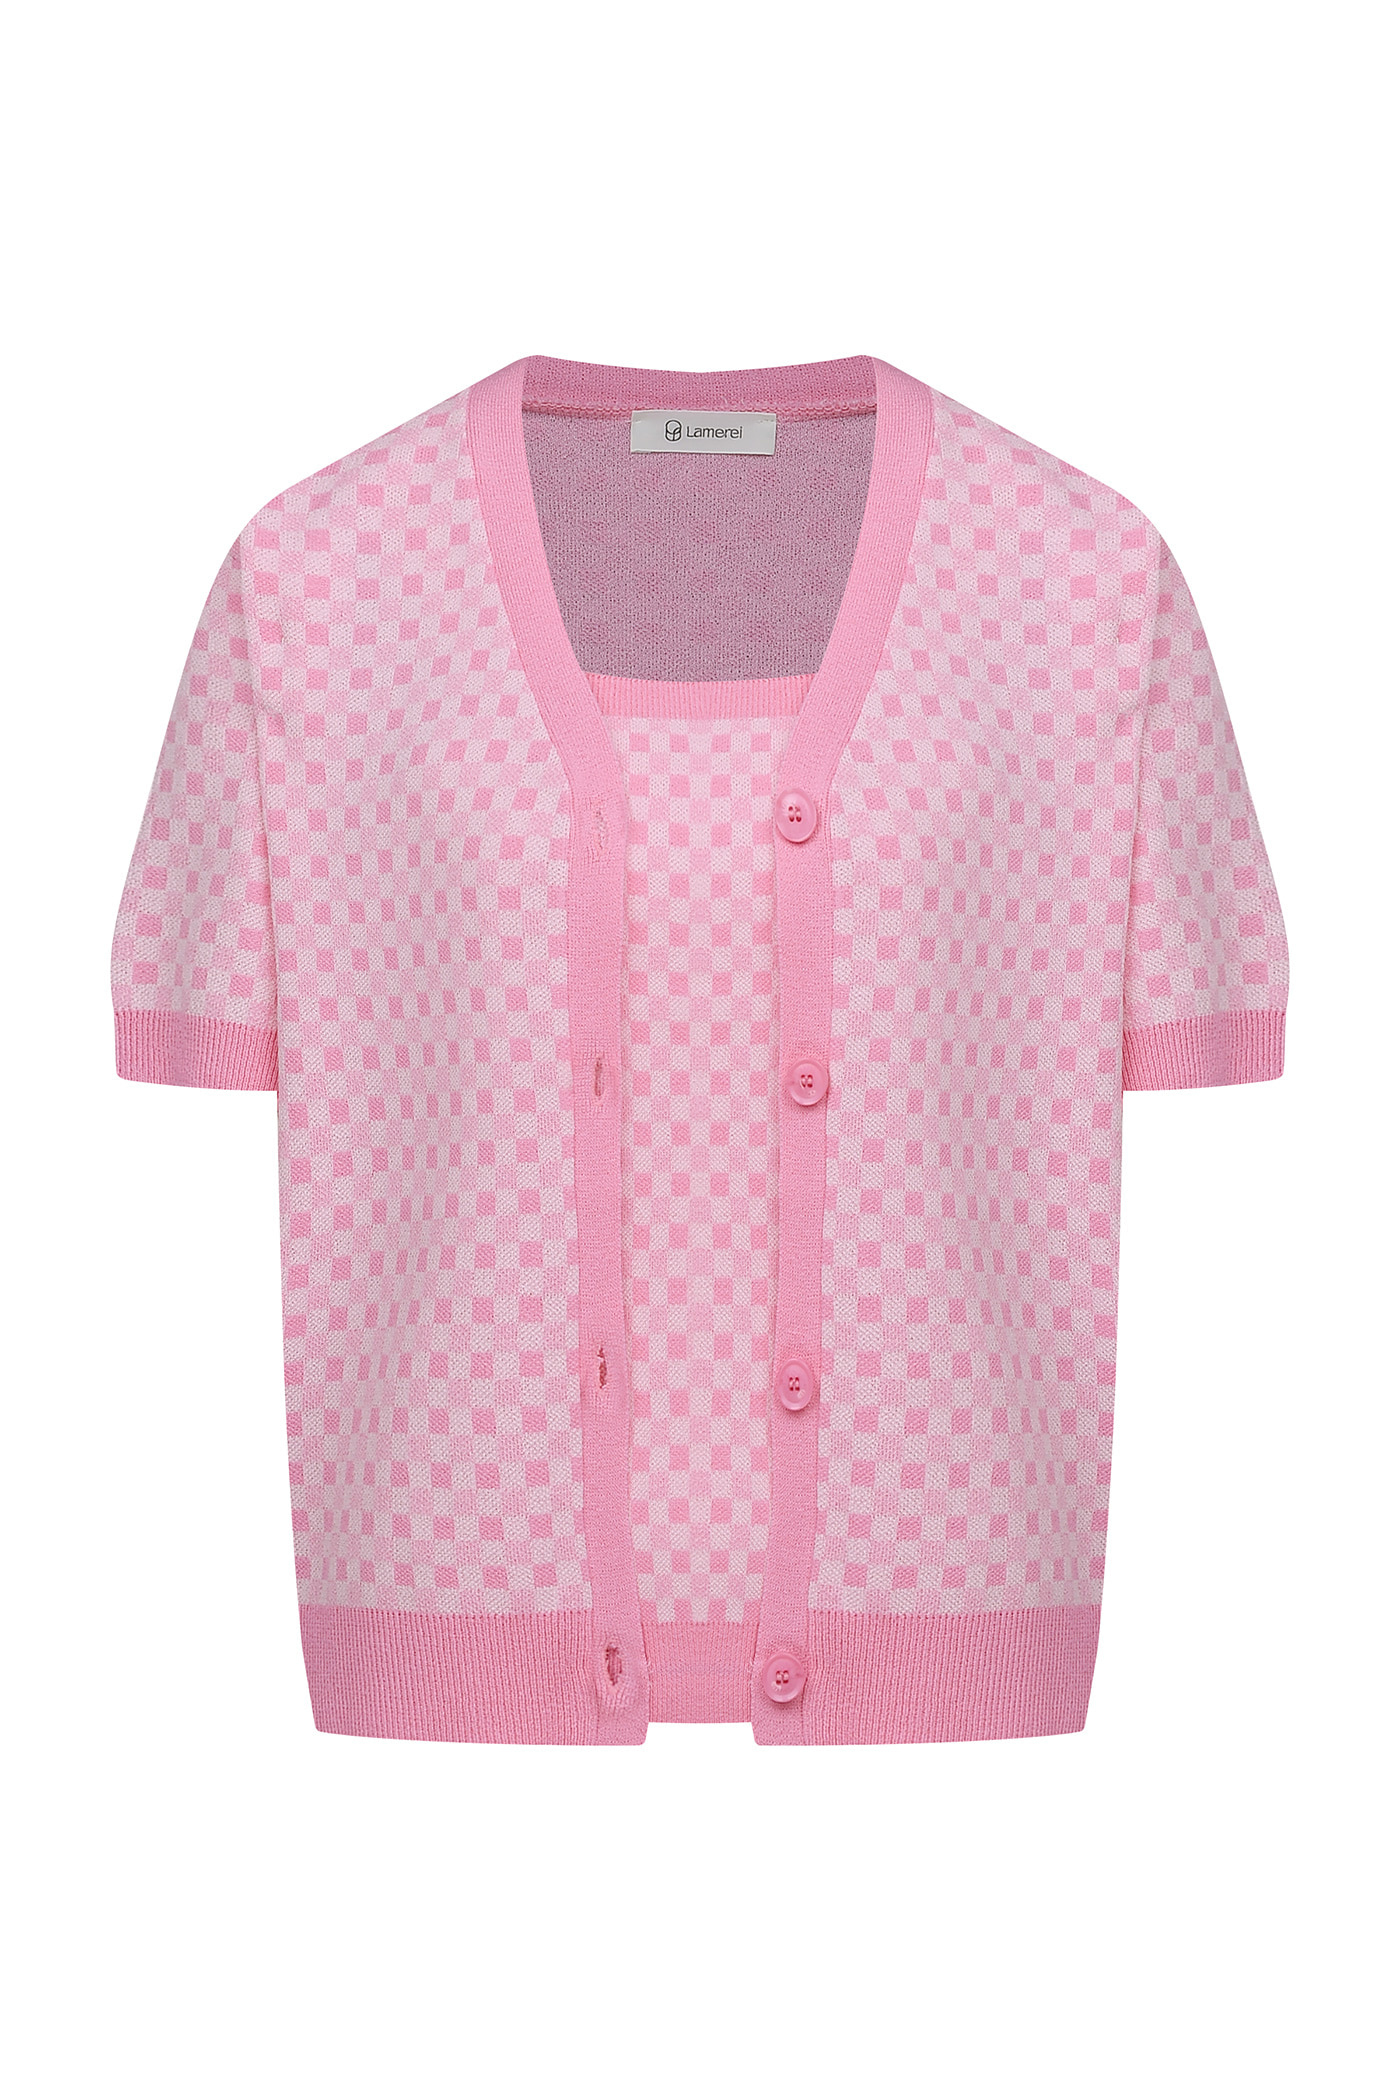 Gingham Check Sleeveless Knit Top-Pink